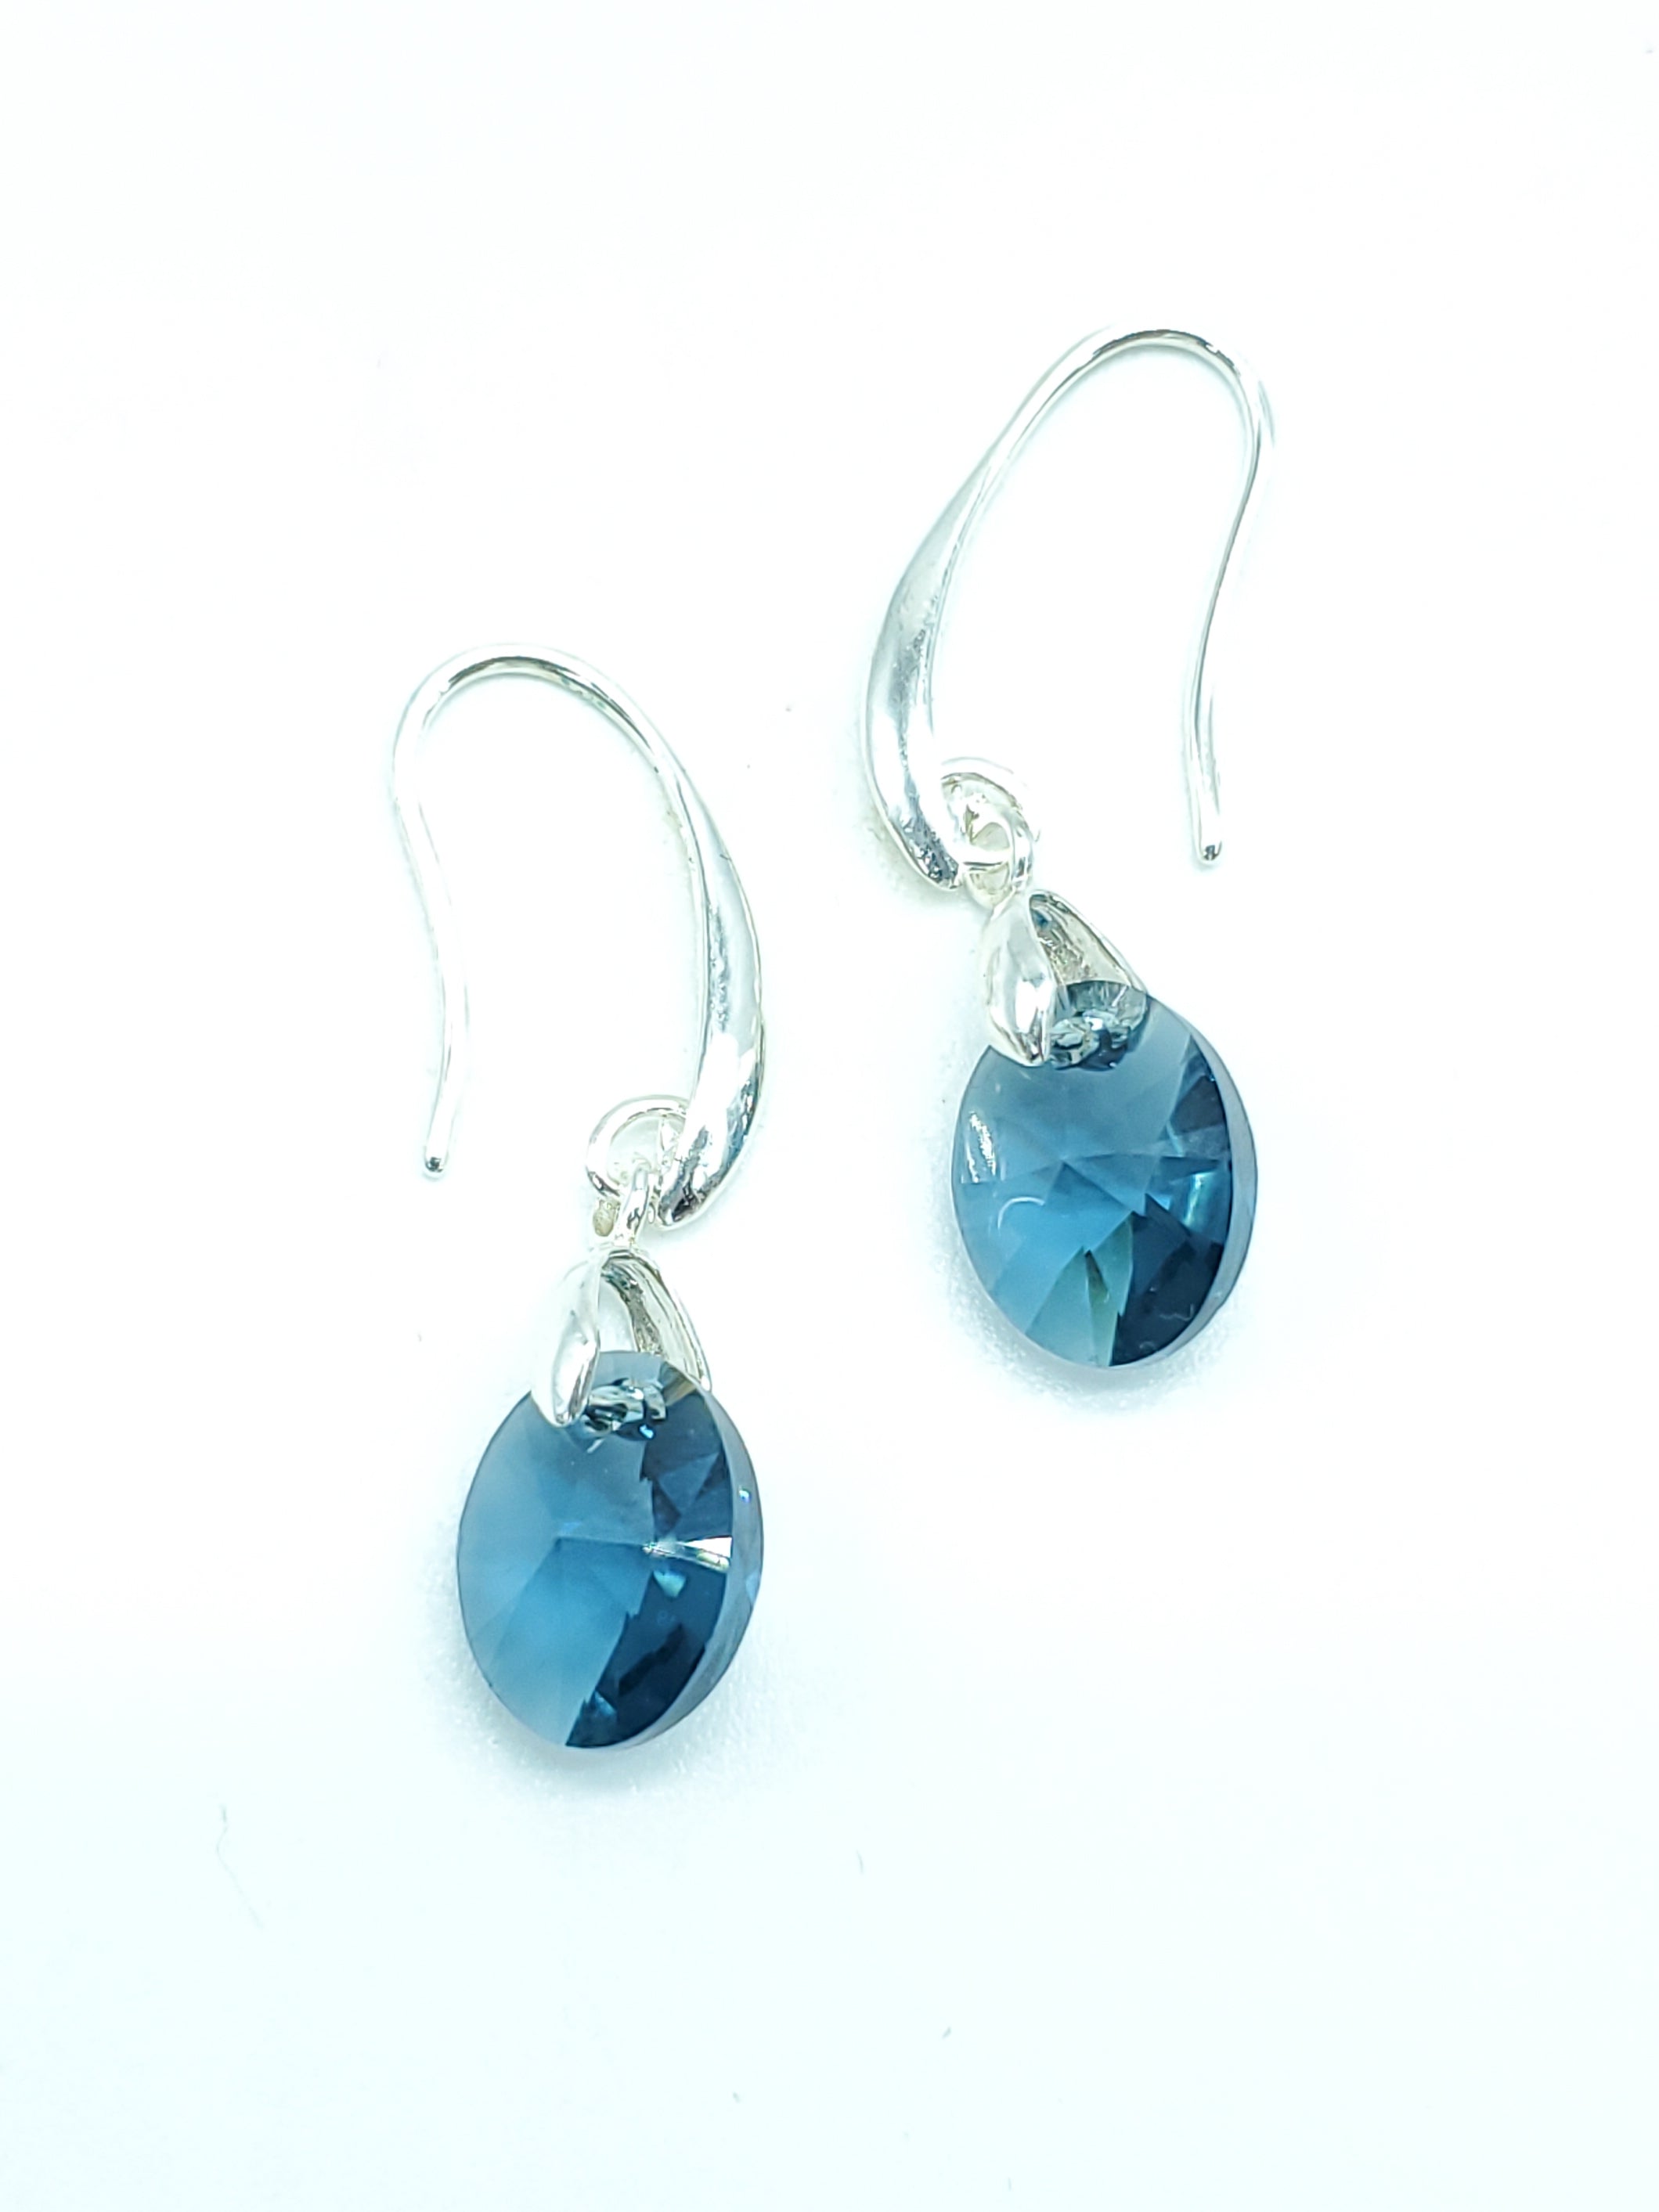 "Montana" OVAL SWAROVSKI CRYSTAL/STERLING SILVER EARRINGS - The Caffeinated Raven